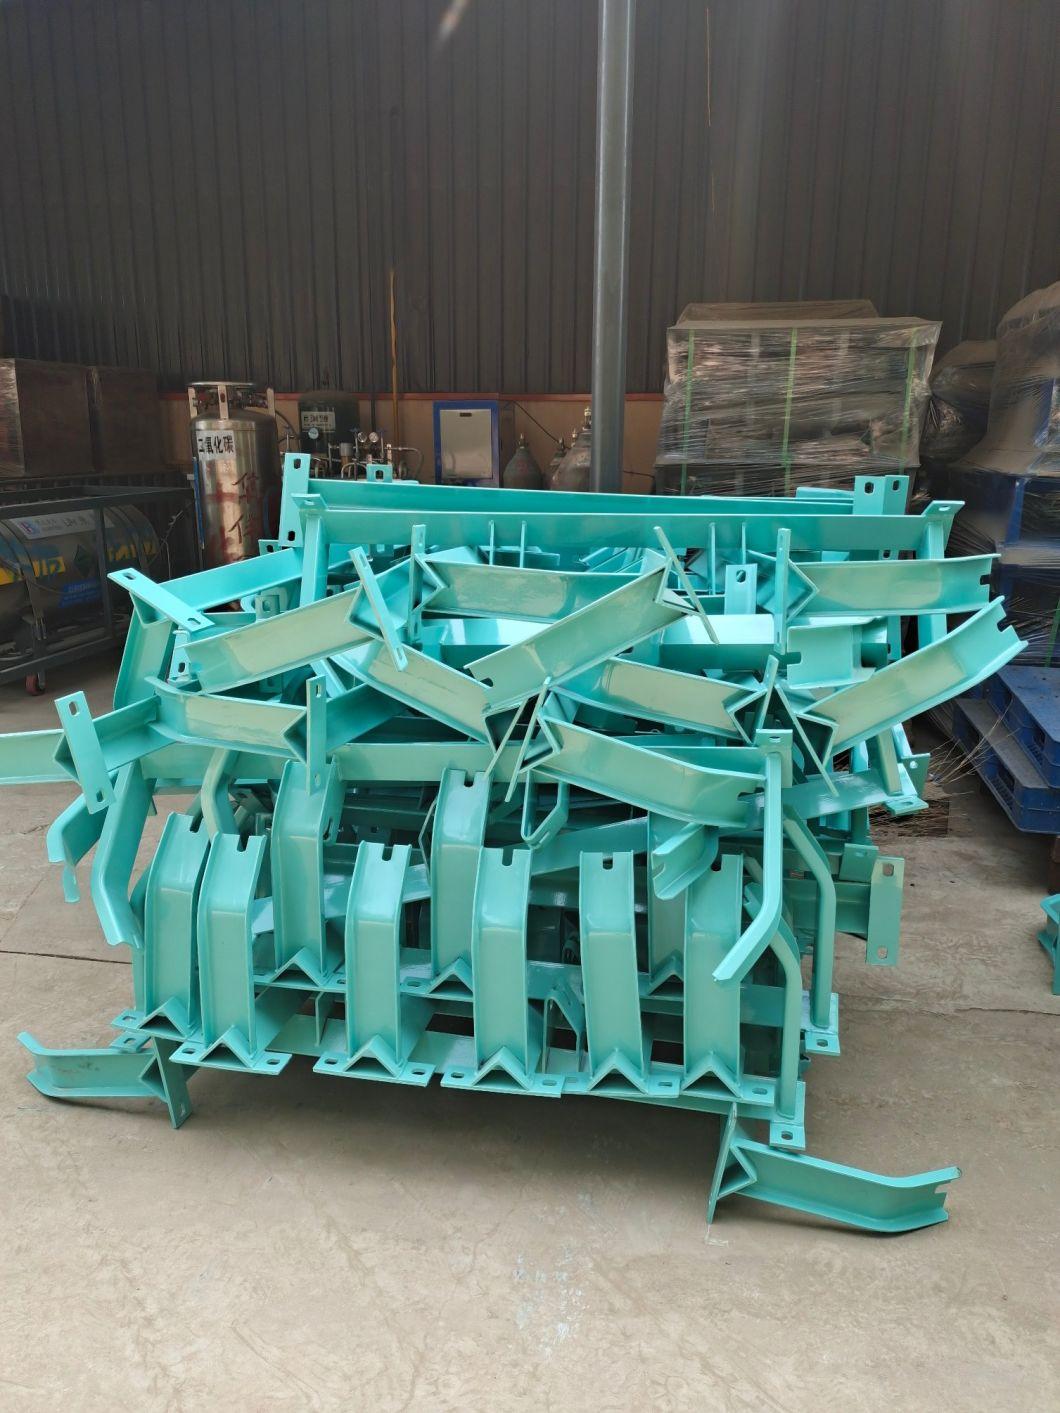 Yilun Conveyor Roller Brackets for Concrete Plant in South America